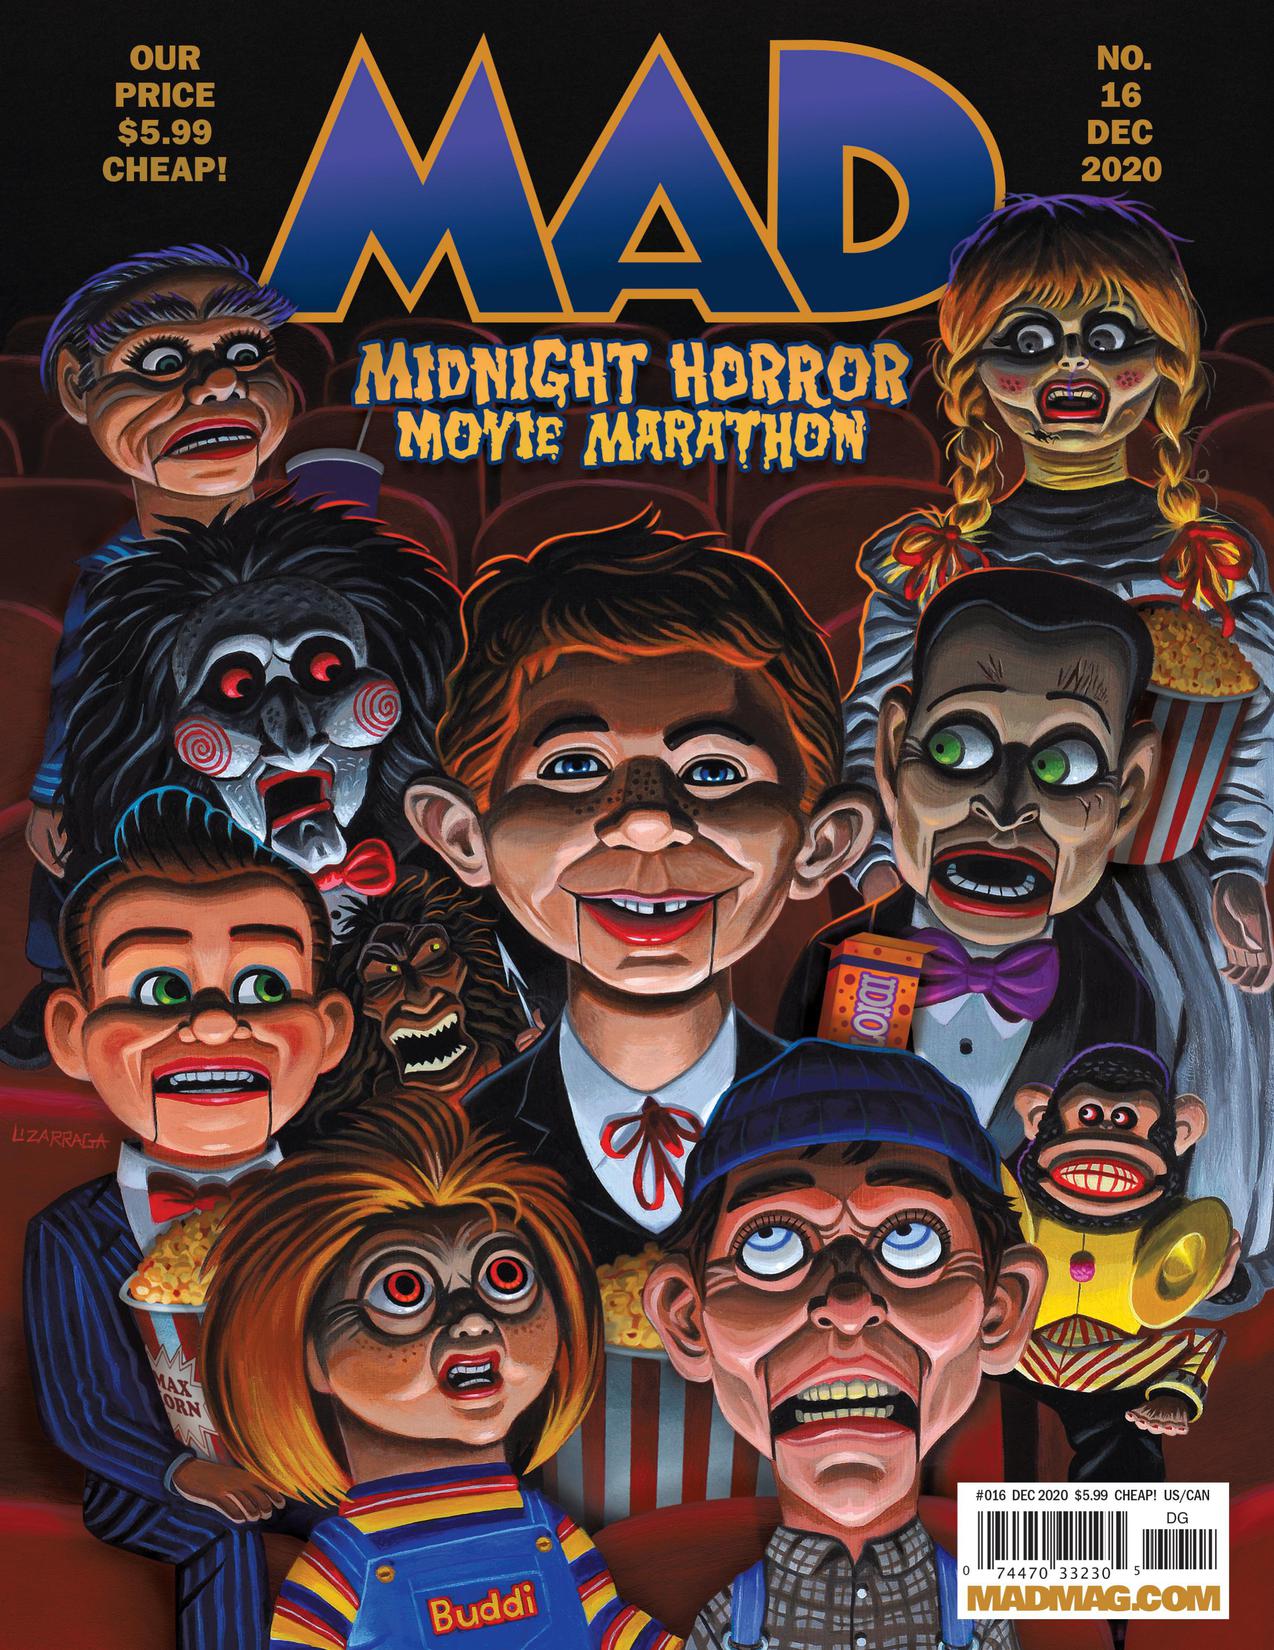 MAD Magazine (2018-) #16 preview images